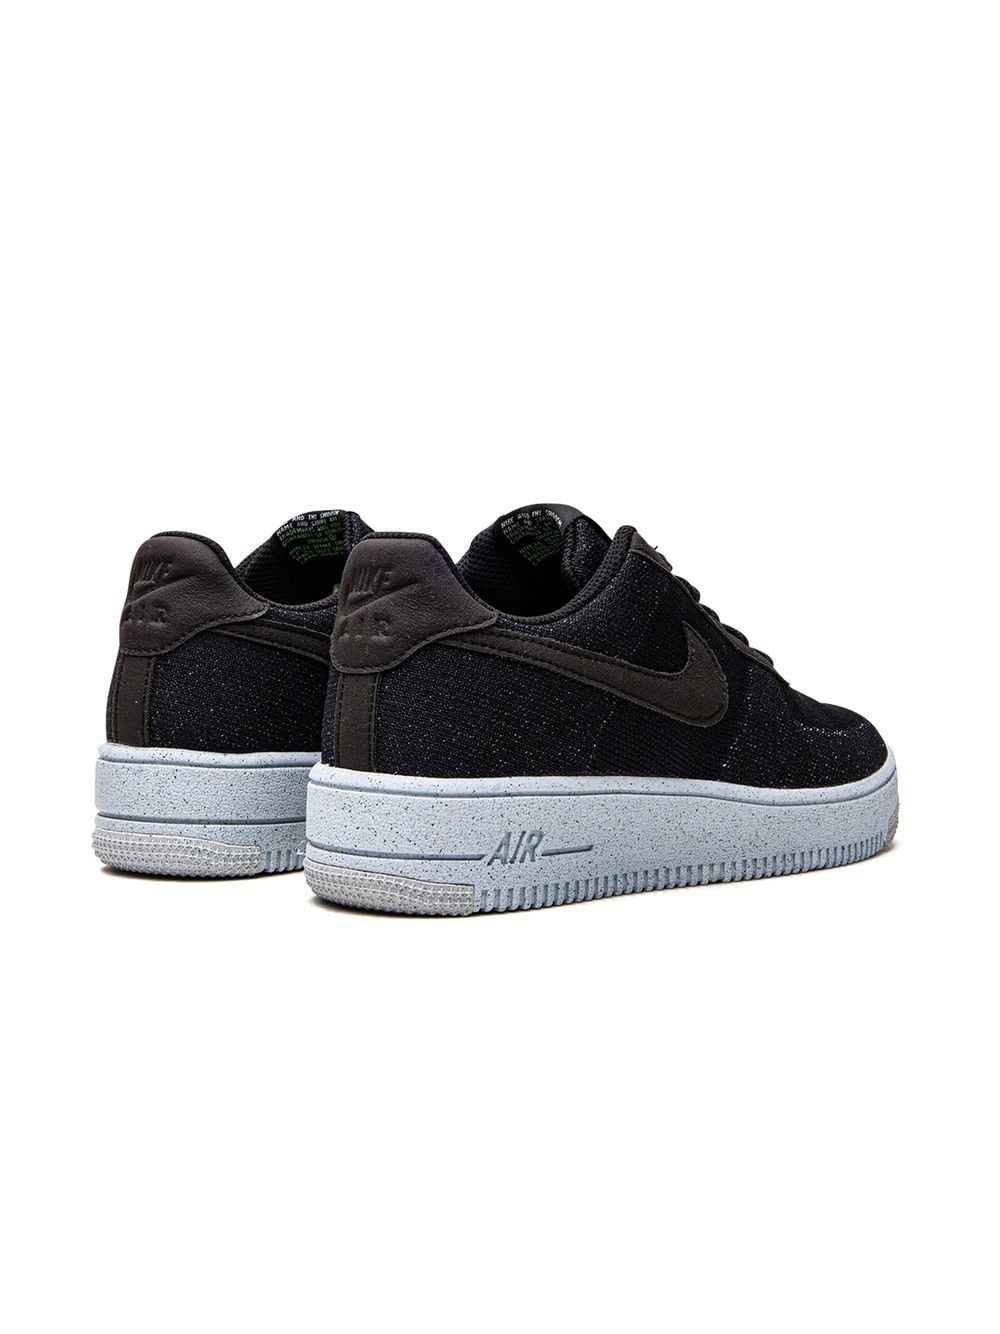 Image 2 of Nike Kids Air Force 1 Crater Flyknit sneakers